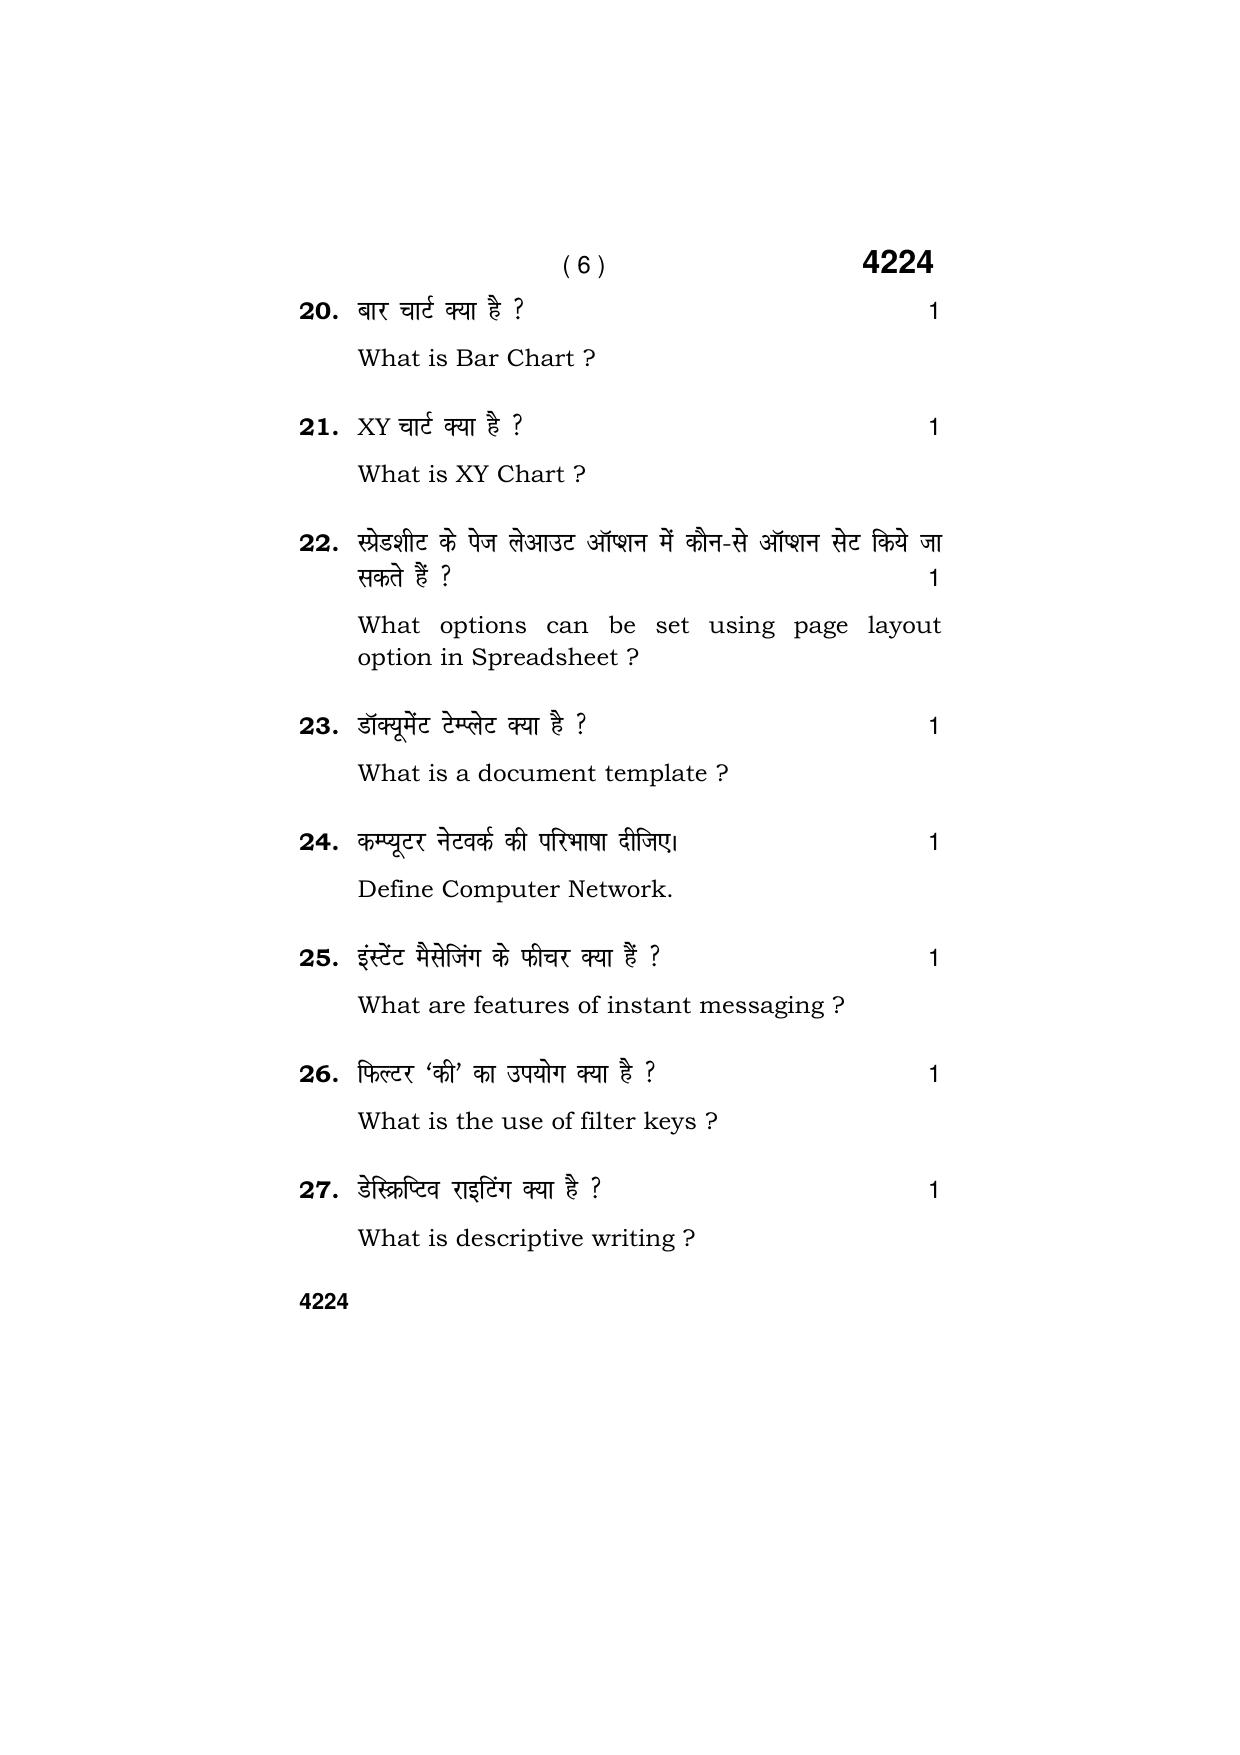 Haryana Board HBSE Class 10 IT & ITES 2019 Question Paper - Page 6